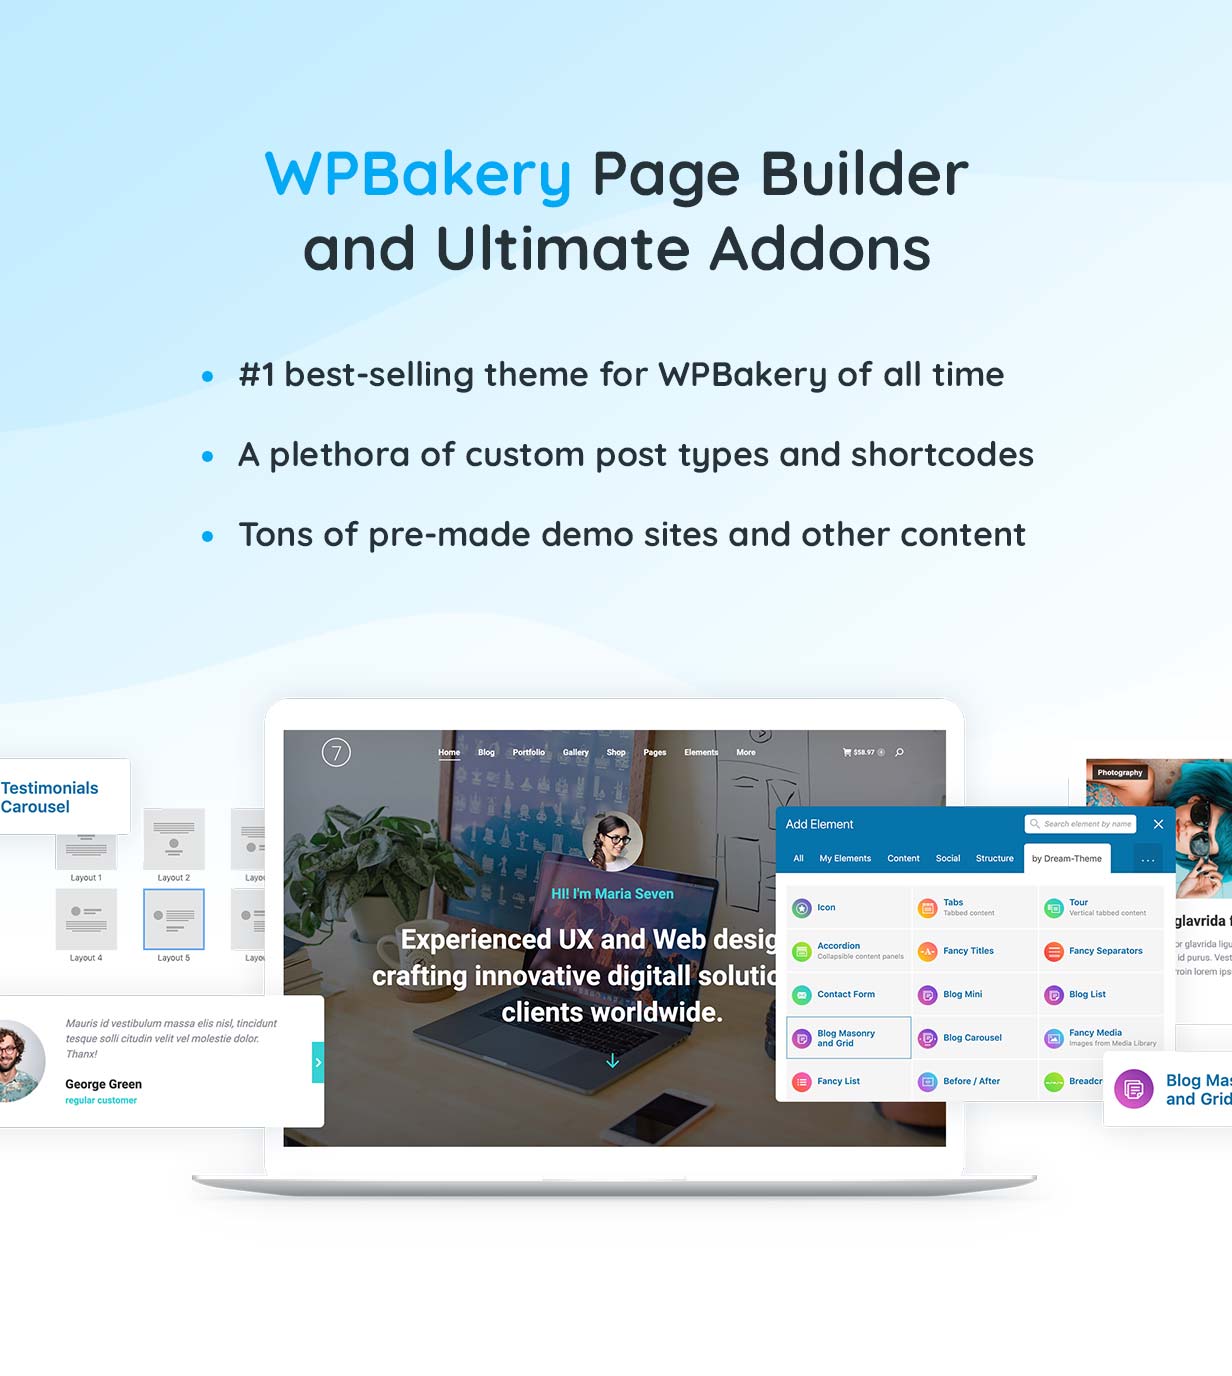 WPBakery Page Builder and Ultimate Addons